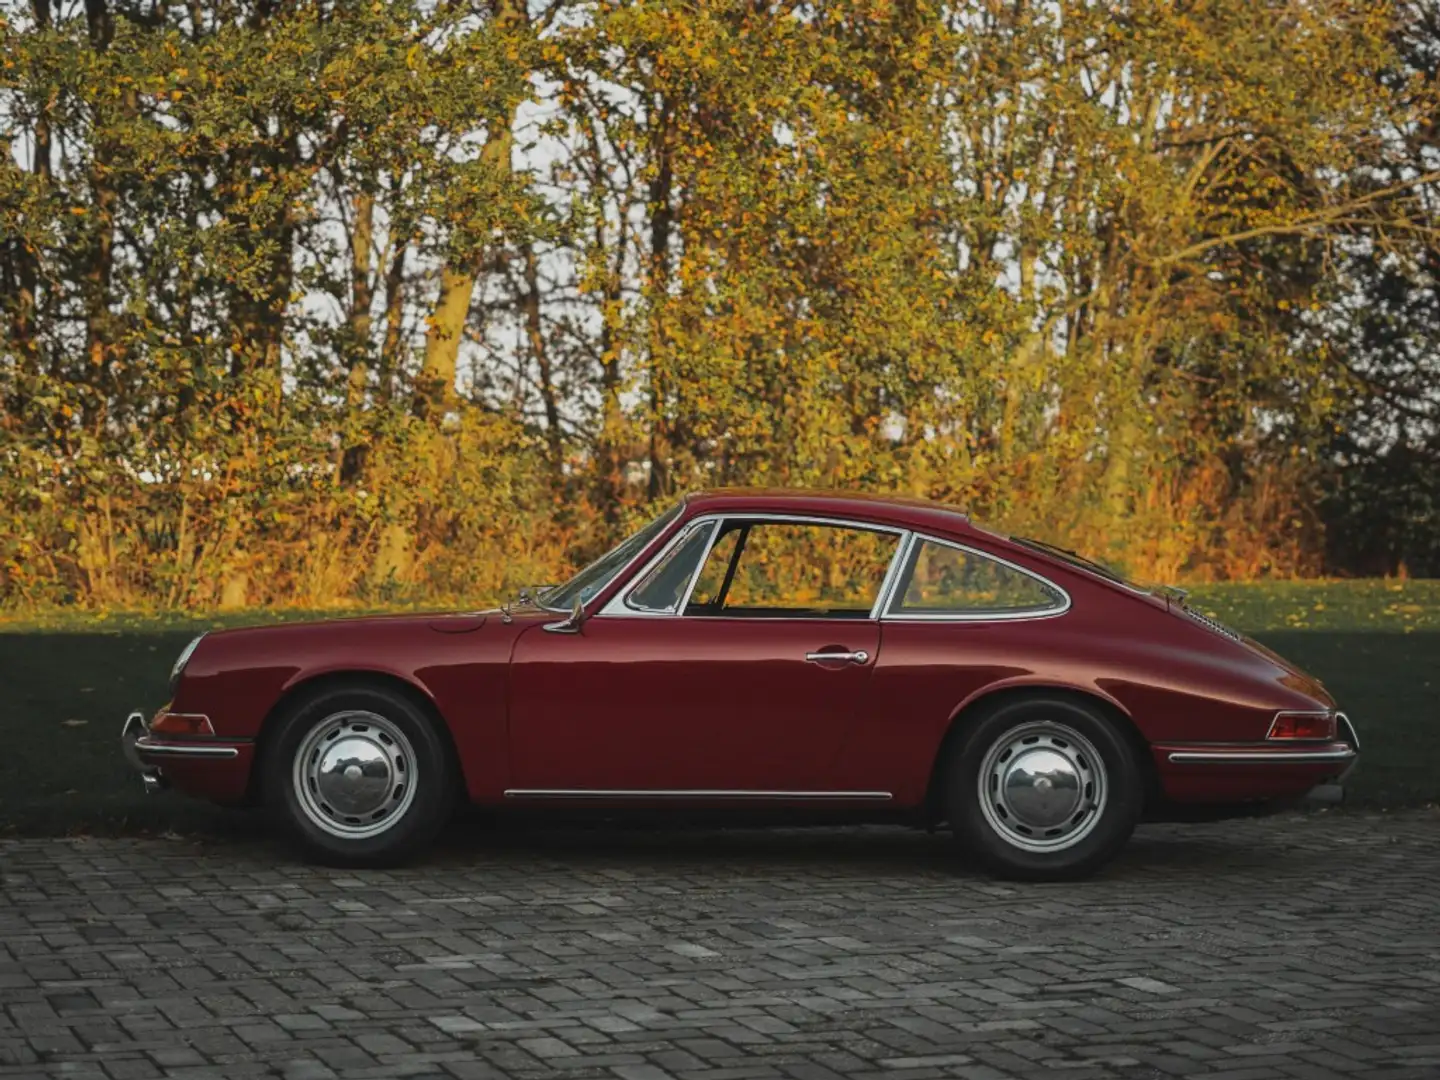 Porsche 911 1965 911 Coupe Matching numbers early chassis numb Червоний - 2